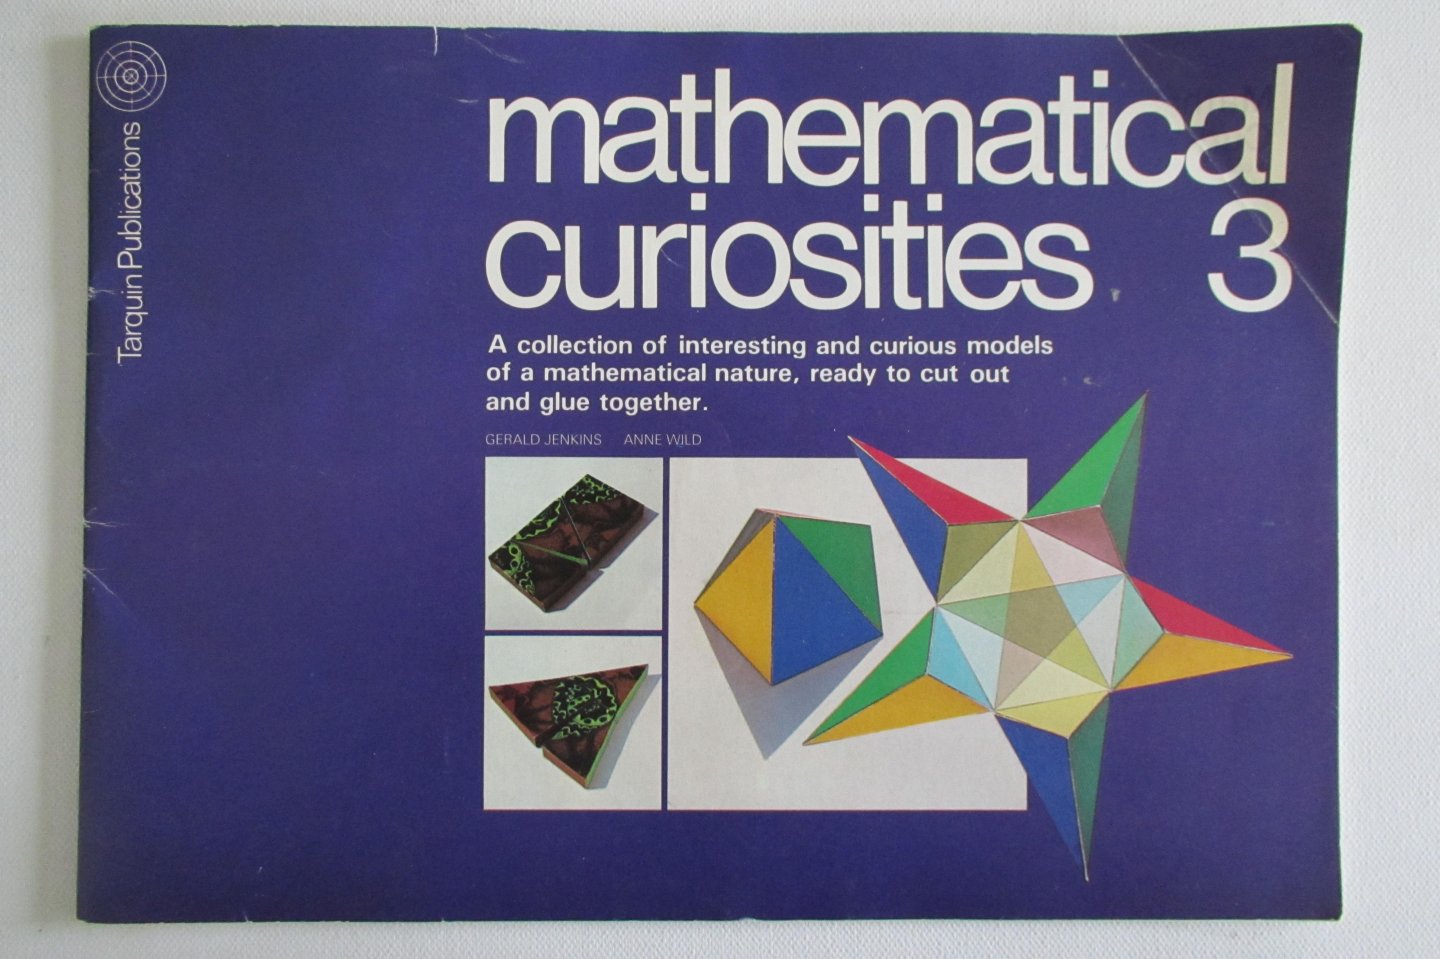 Jenkins, Gerald en Anne Wild - Mathematical Curiosities 3- a collection of interesting and curious models of a mathematical nature, ready to cut out and glue together.